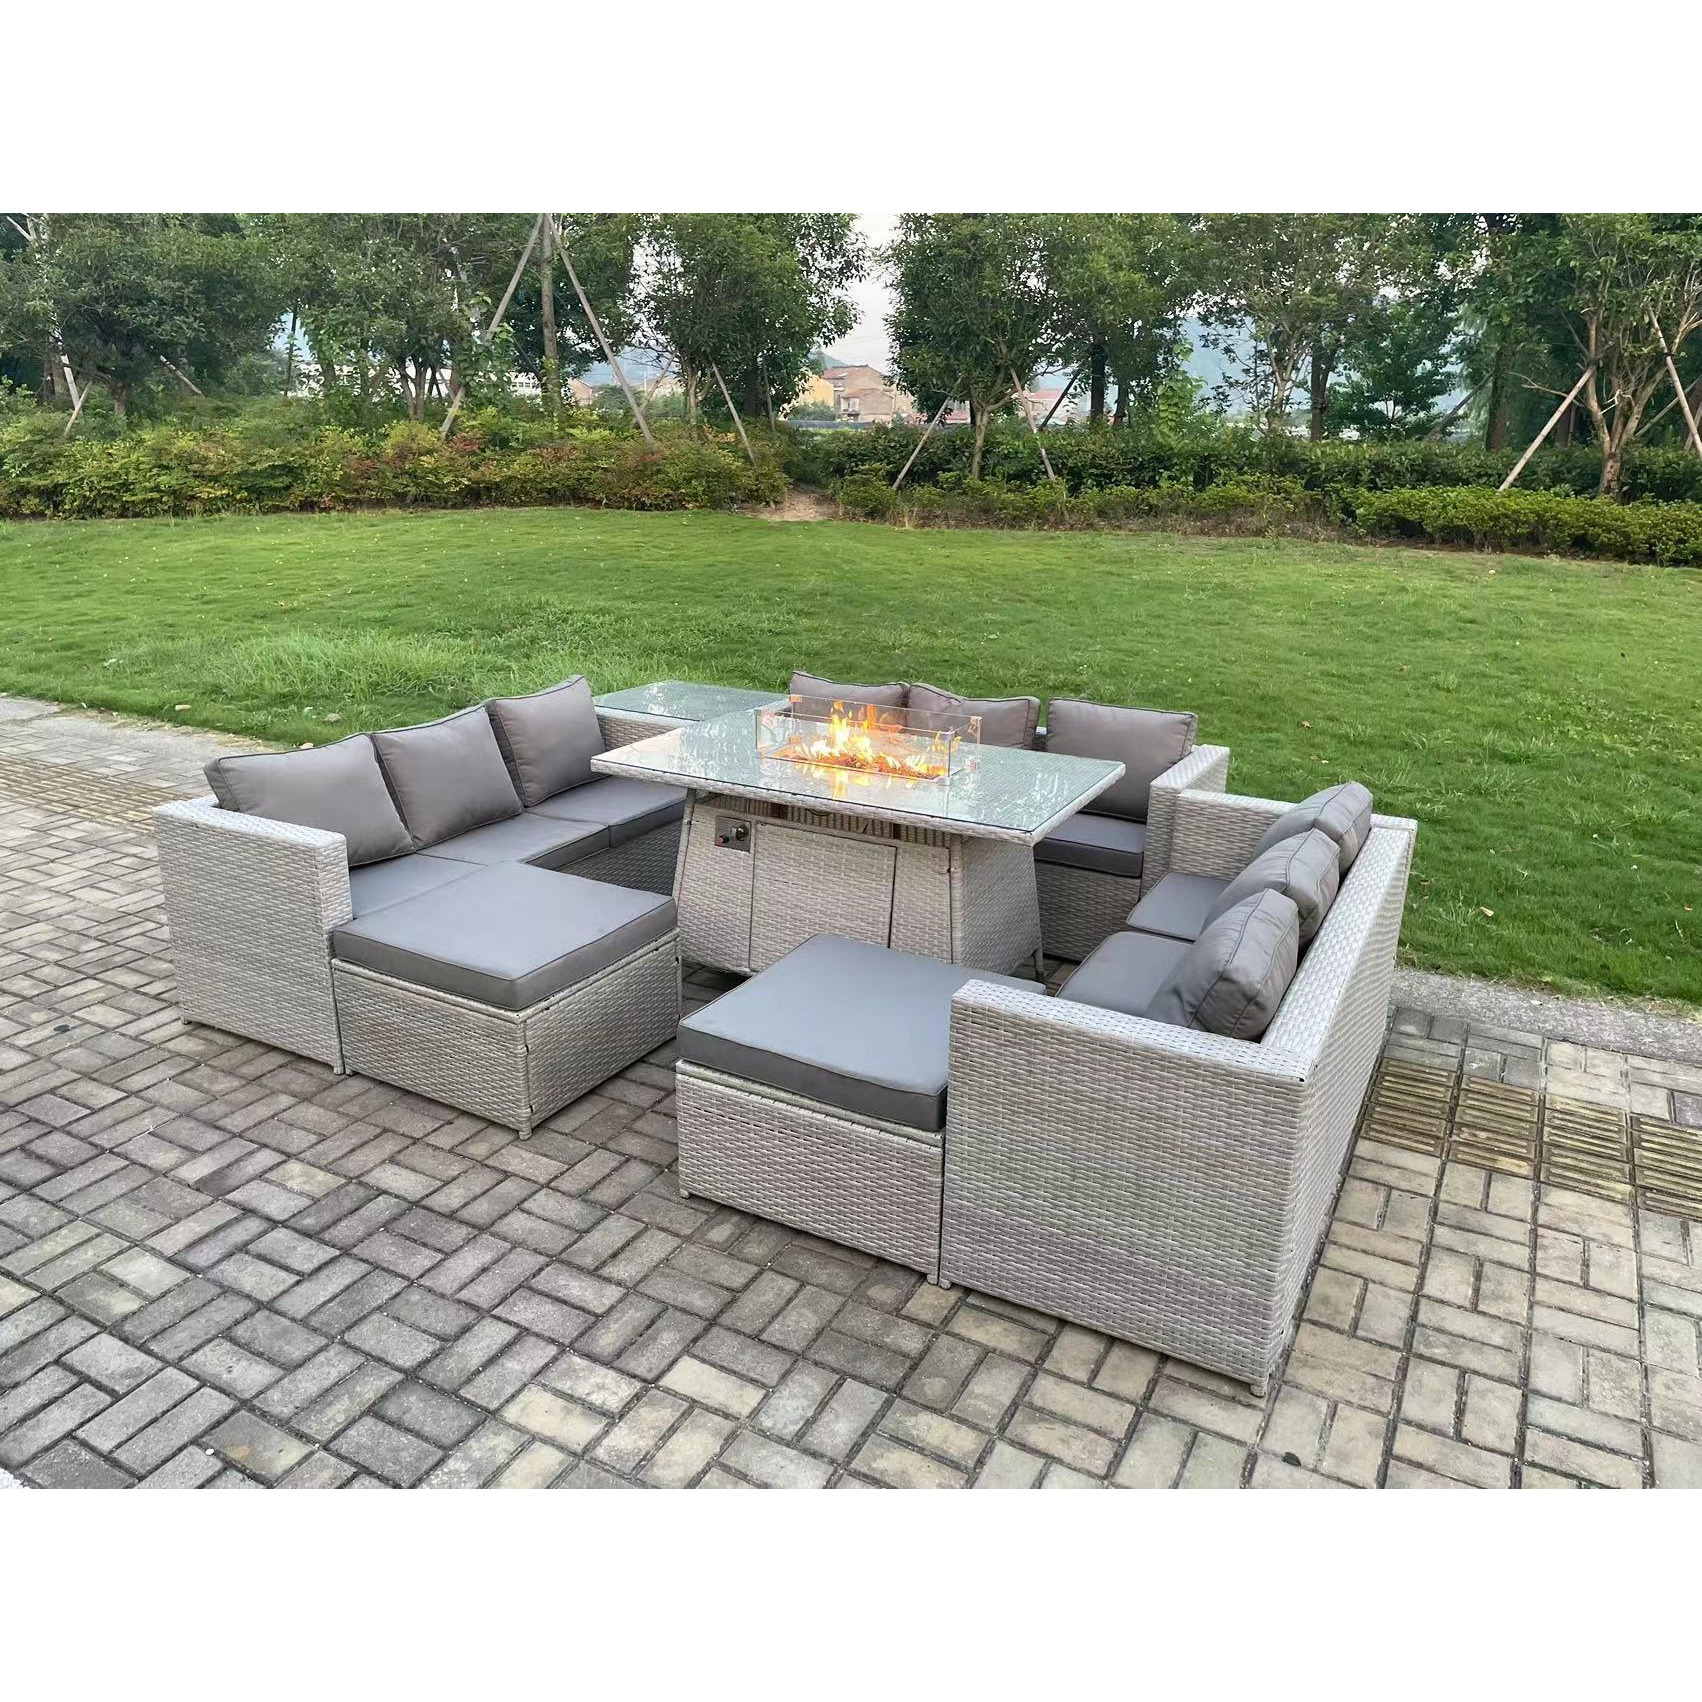 11 Seater Outdoor Garden Dining Sets Rattan Furniture Gas Fire Pit Dining Table Gas Heater with Side Table - image 1